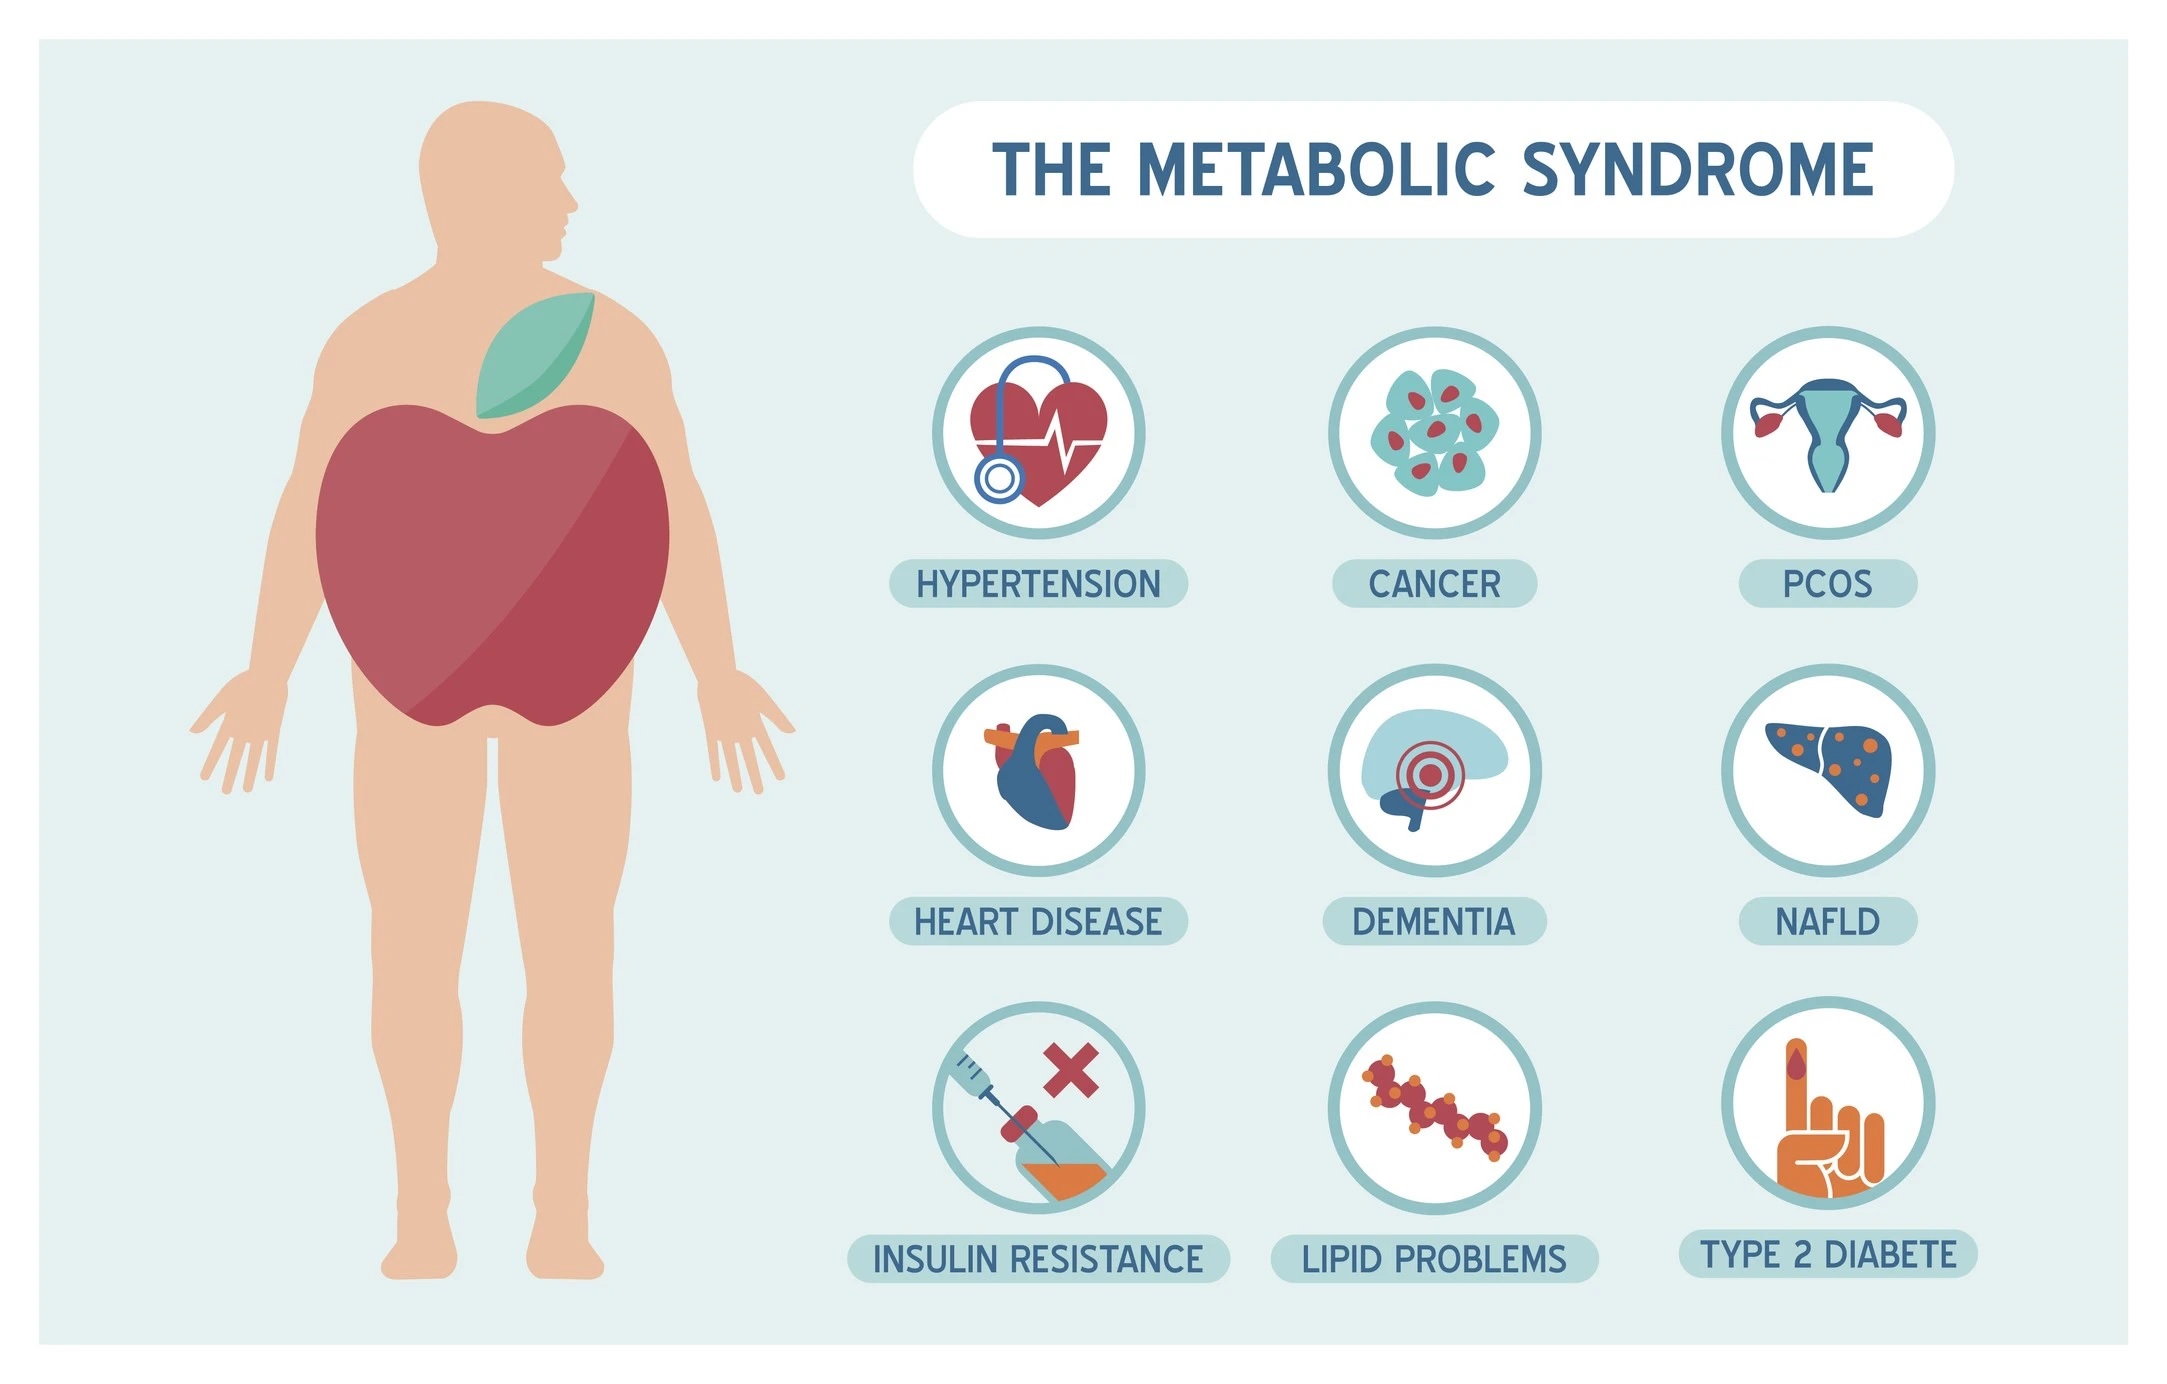 Sugar consumption and metabolic syndrome